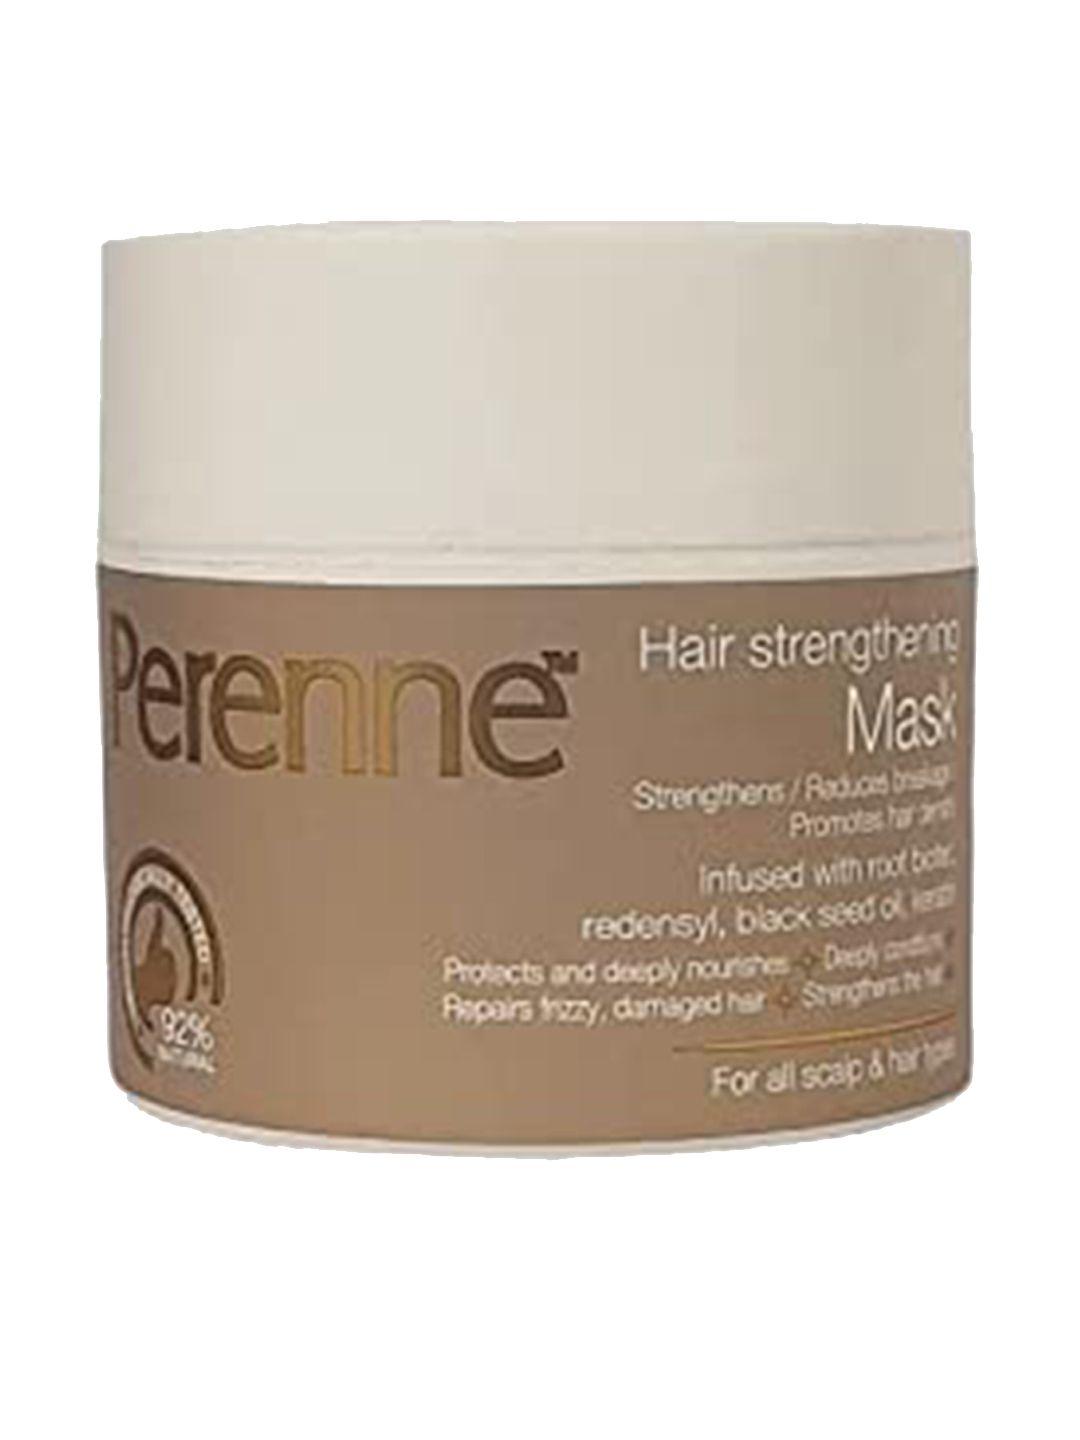 perenne hair strengthening mask with root biotec & redensyl - 100g